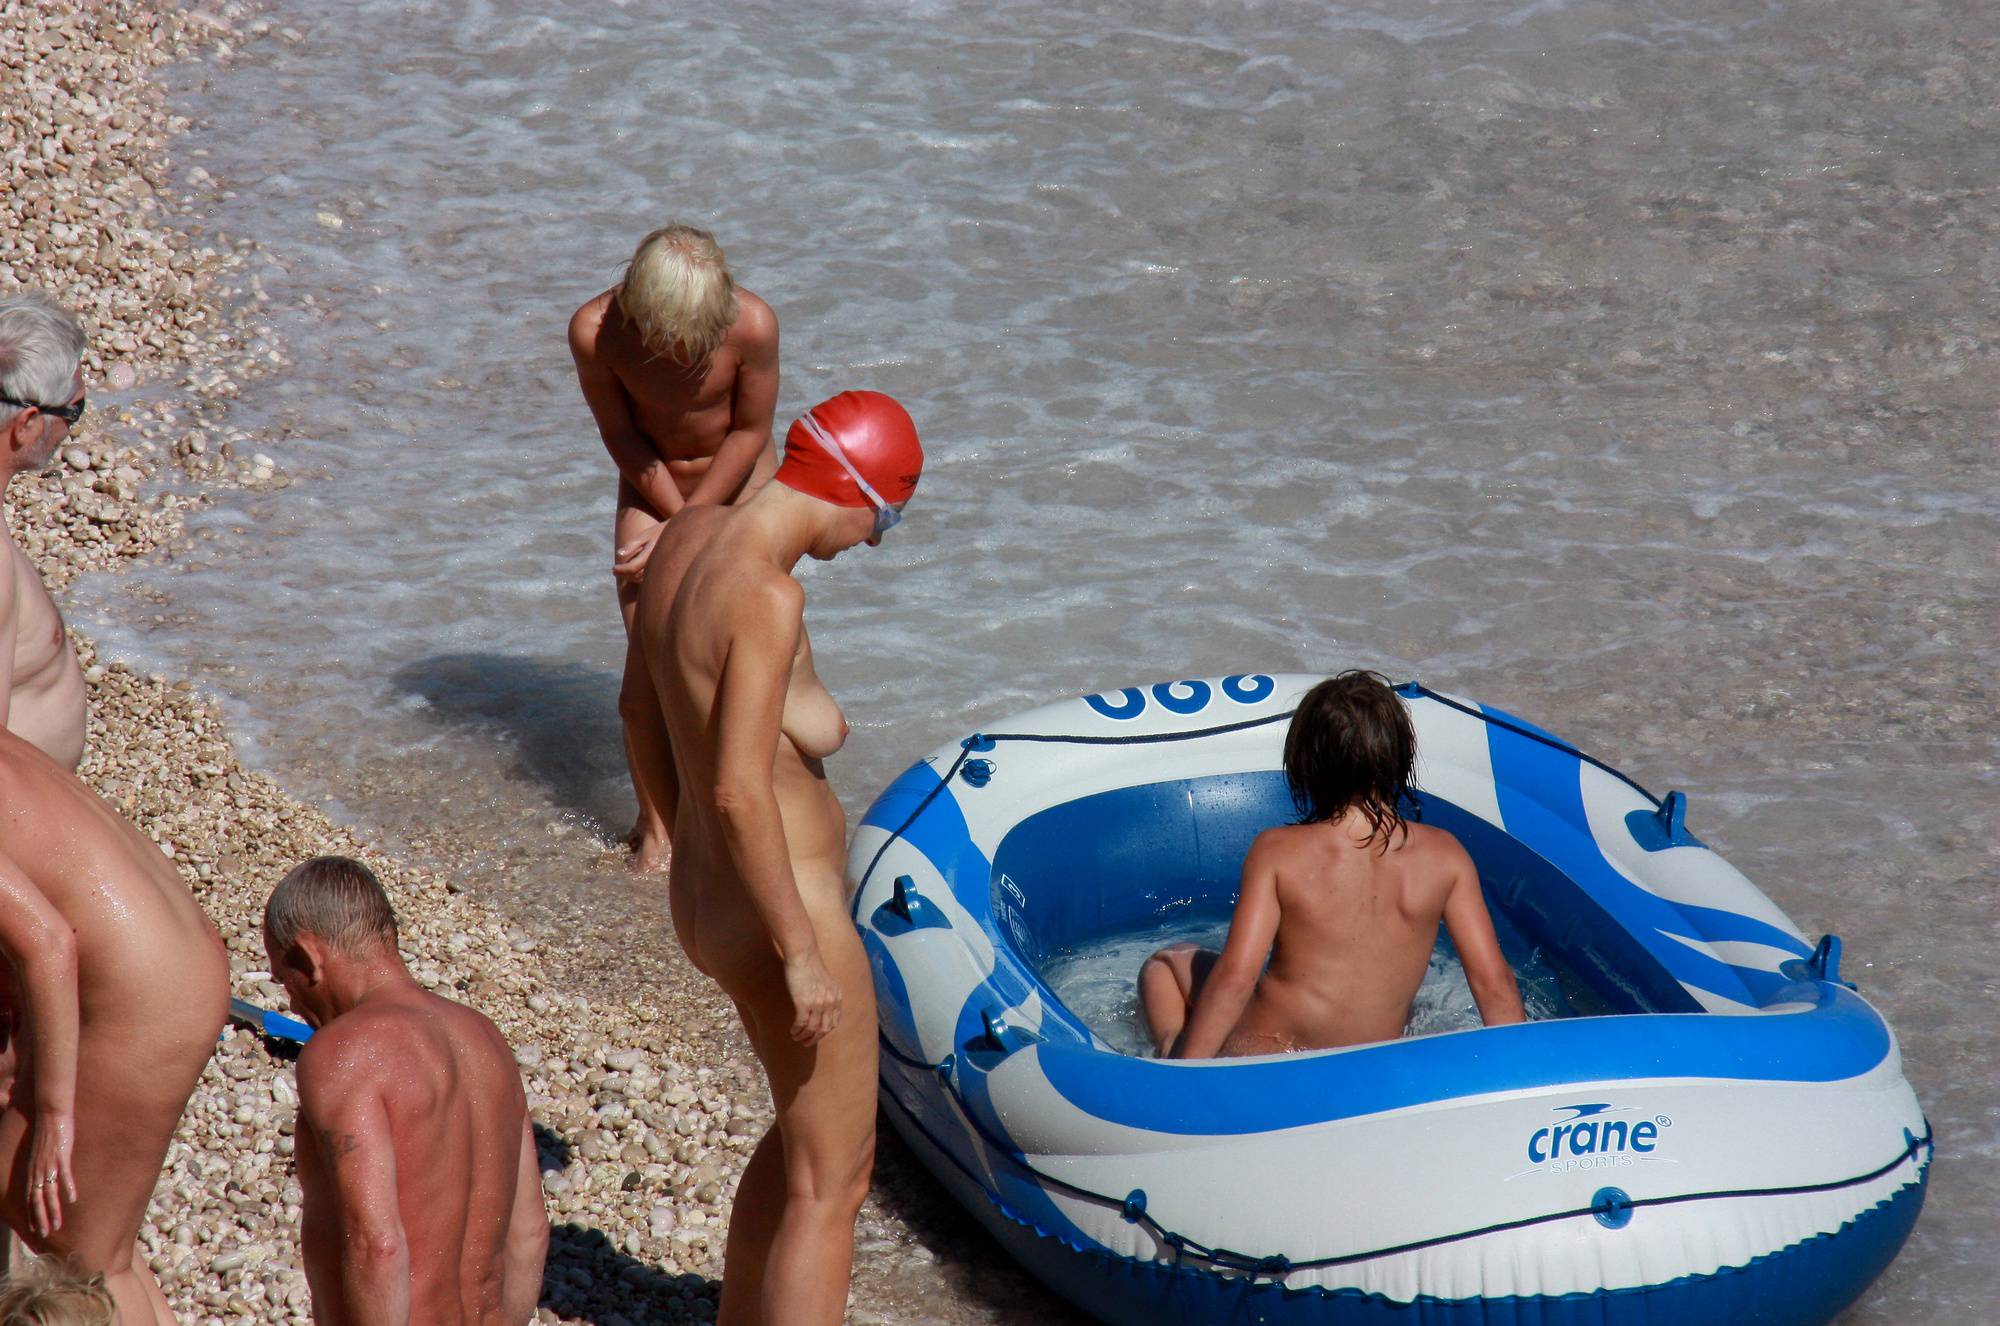 Naturist Blue Boat Waters - 3